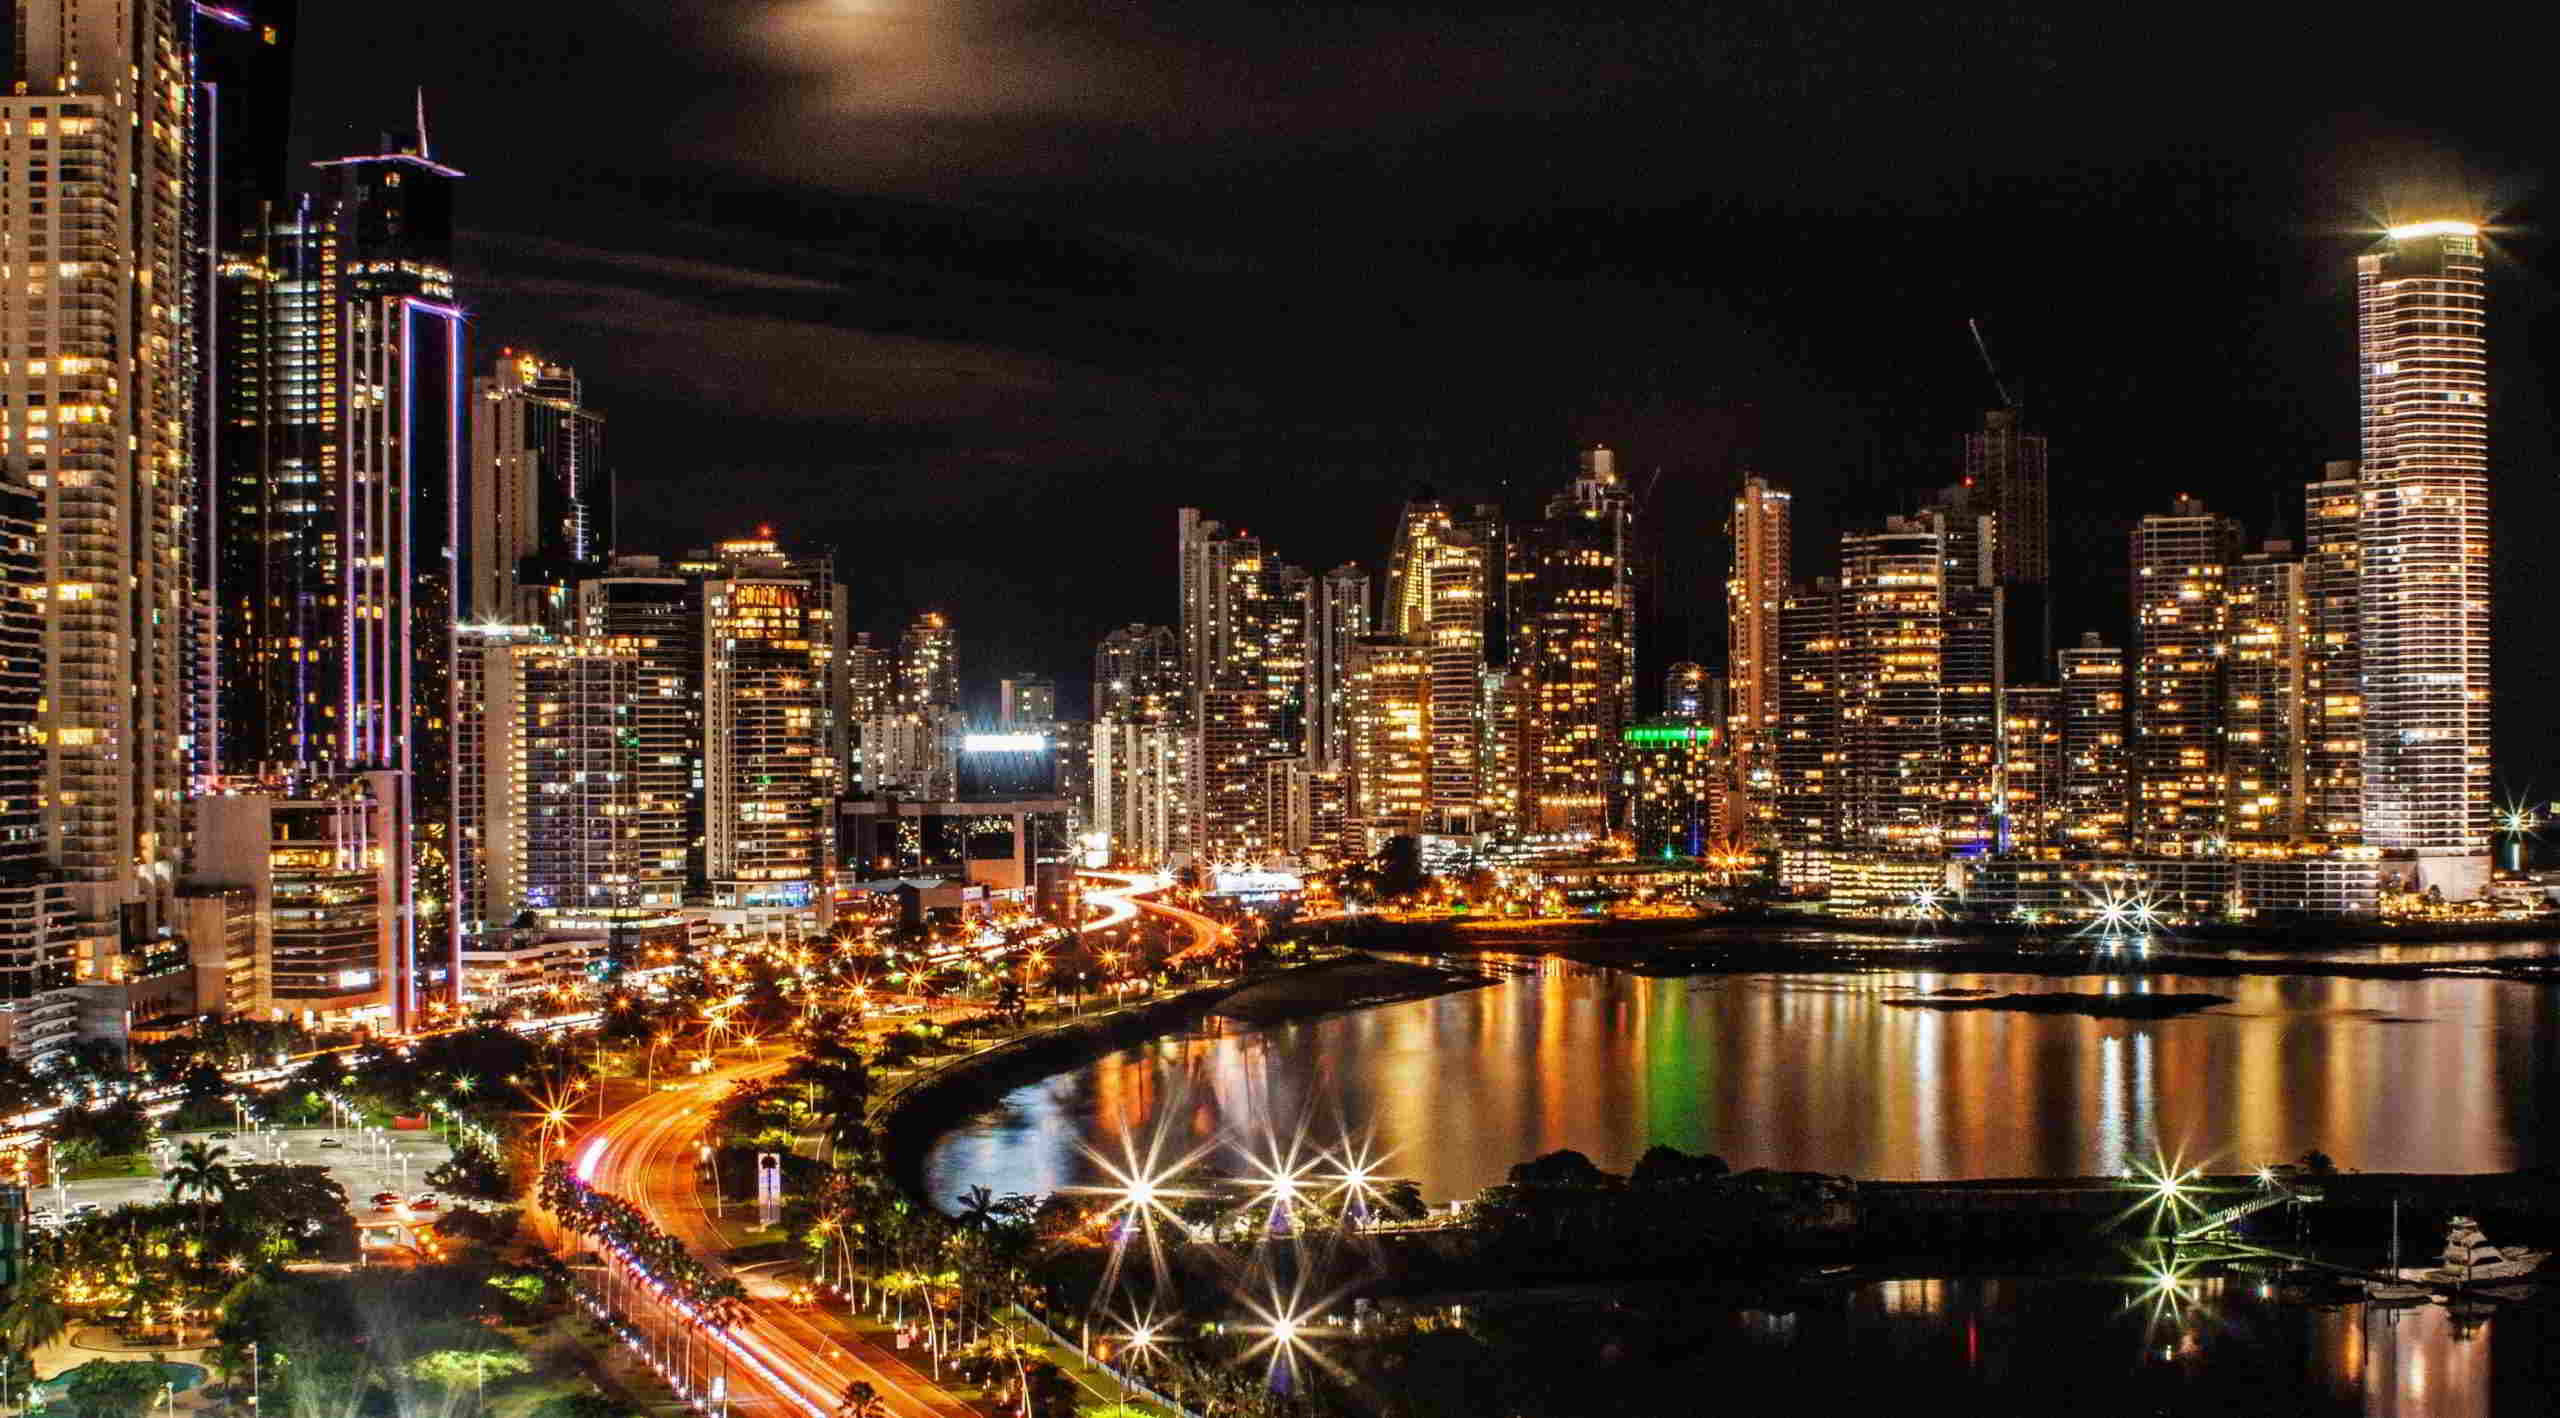 Flights to and from Panama City resumed, with convenient departures on Wednesdays and Sundays